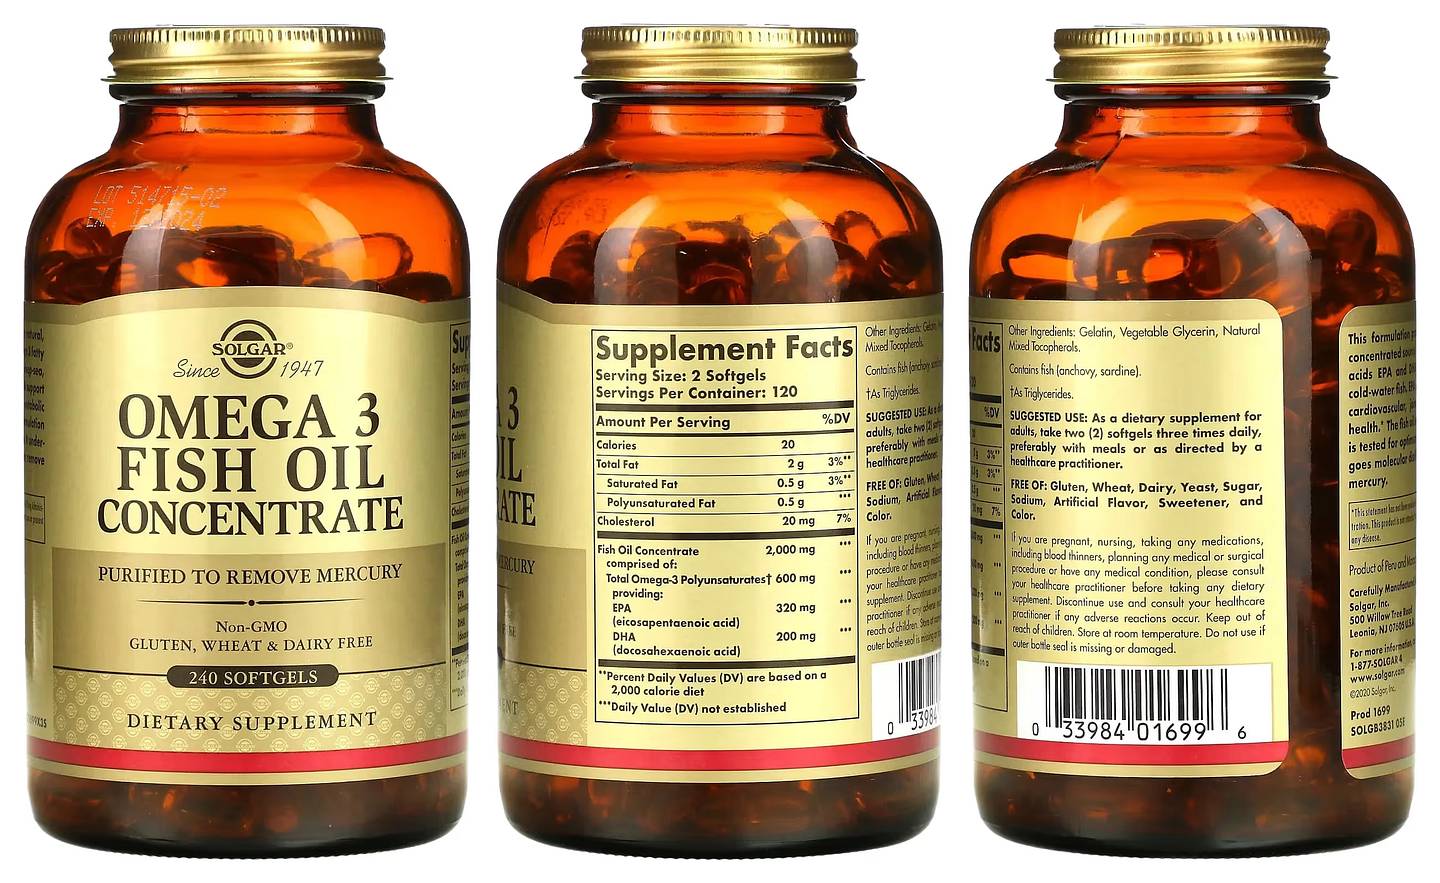 Solgar, Omega 3 Fish Oil Concentrate packaging